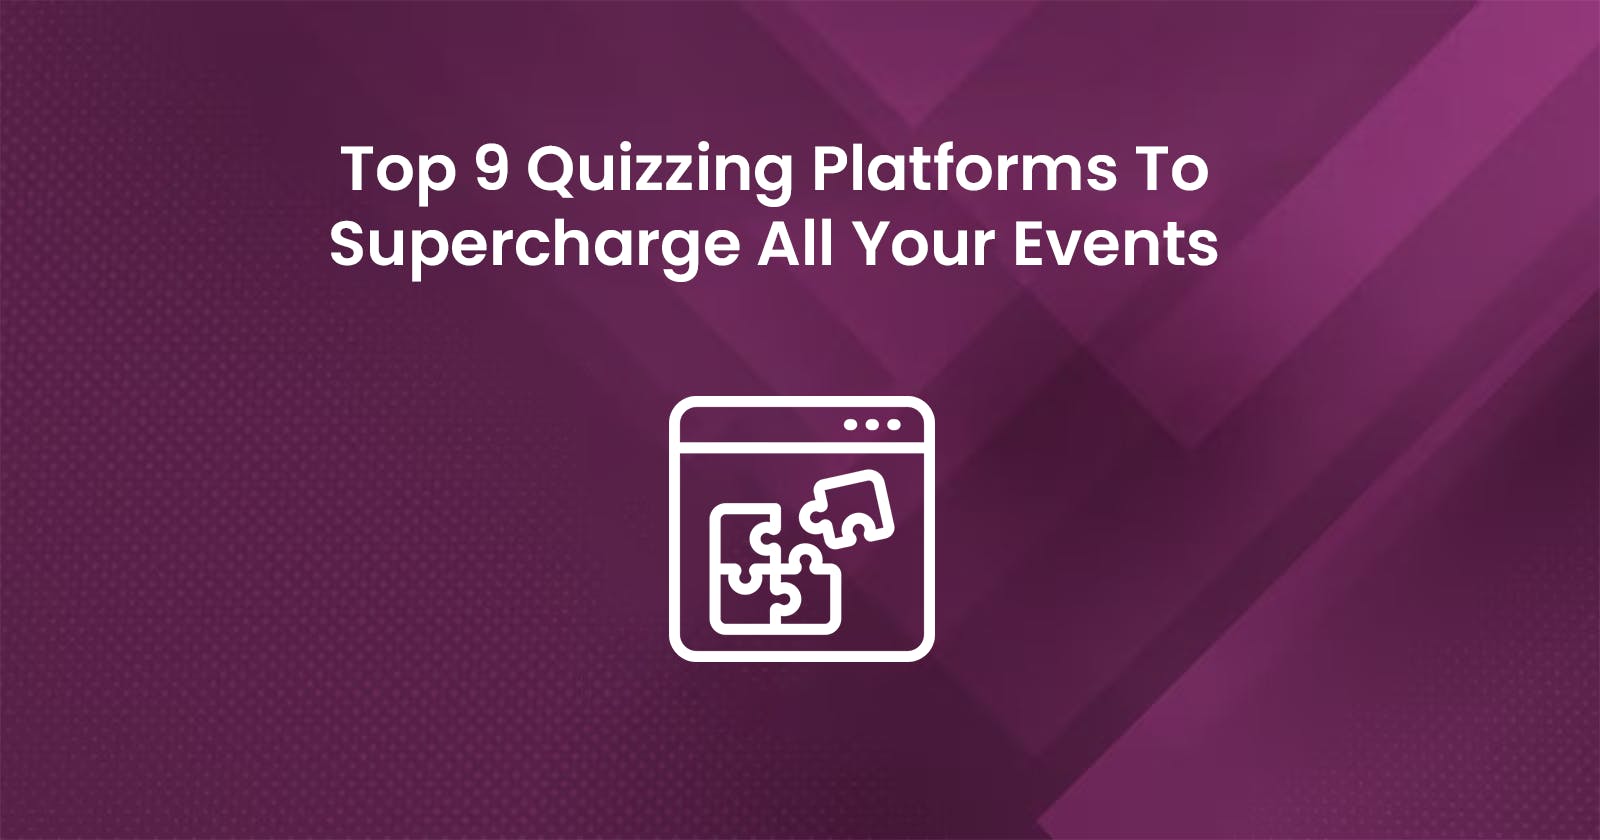 Top 9 Quizzing Platforms To Supercharge Your Events